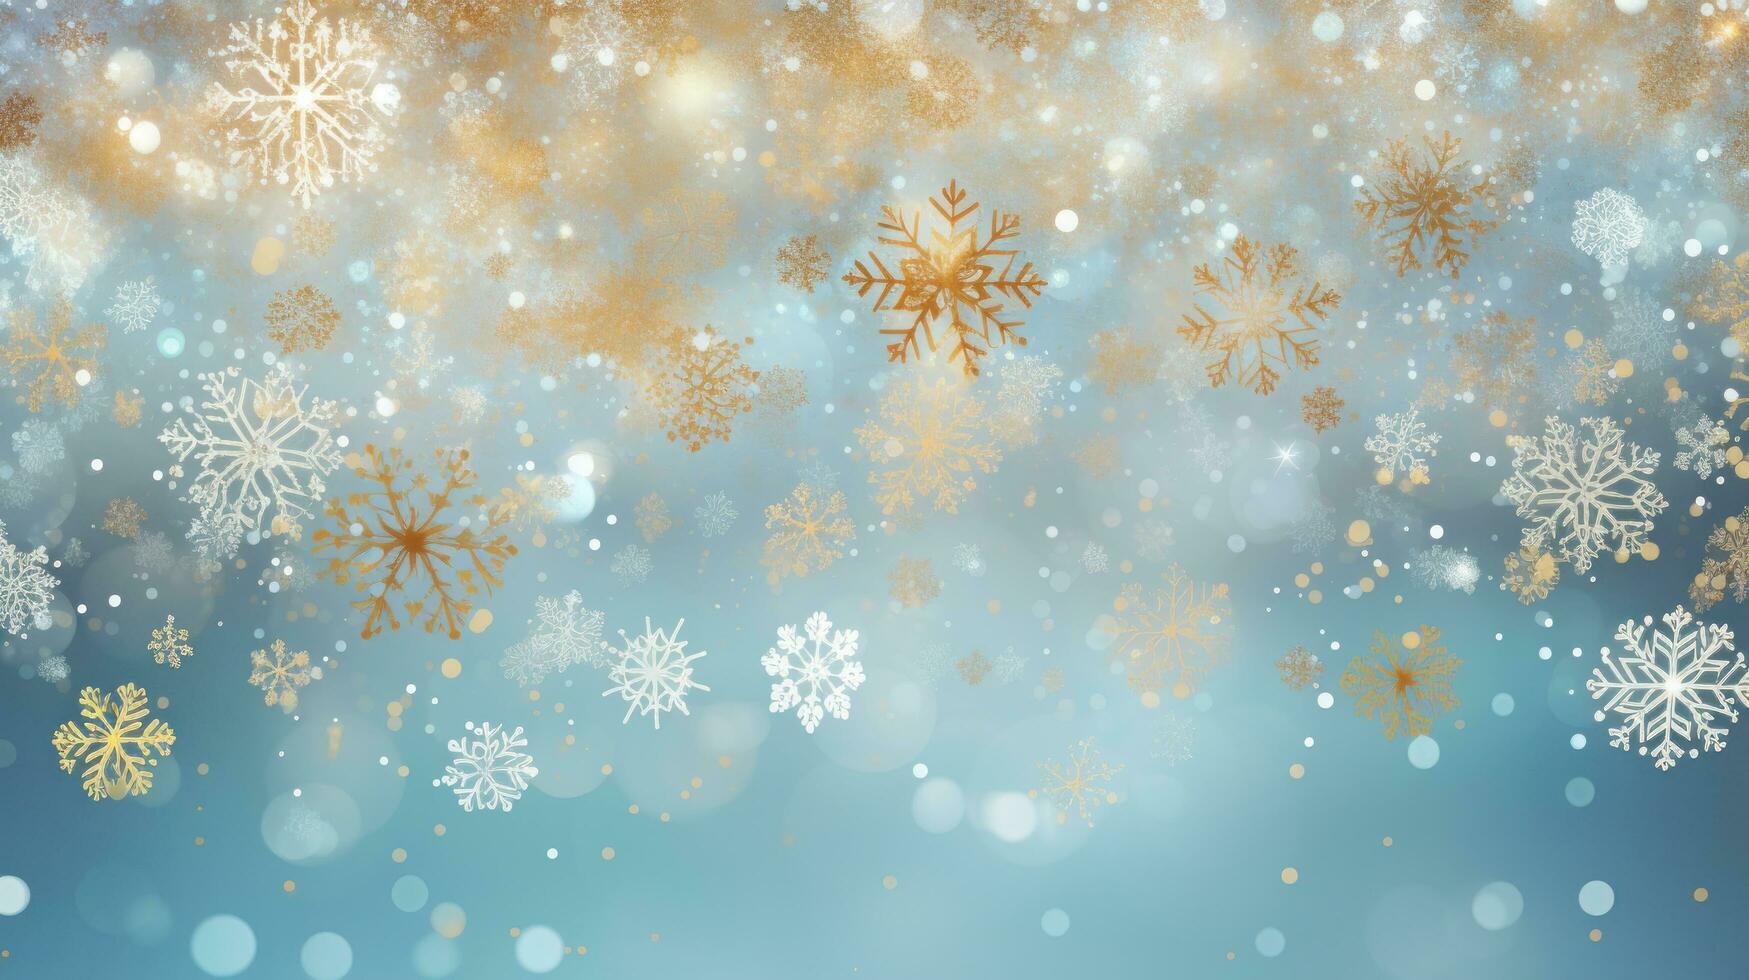 Winter background with snowflakes photo